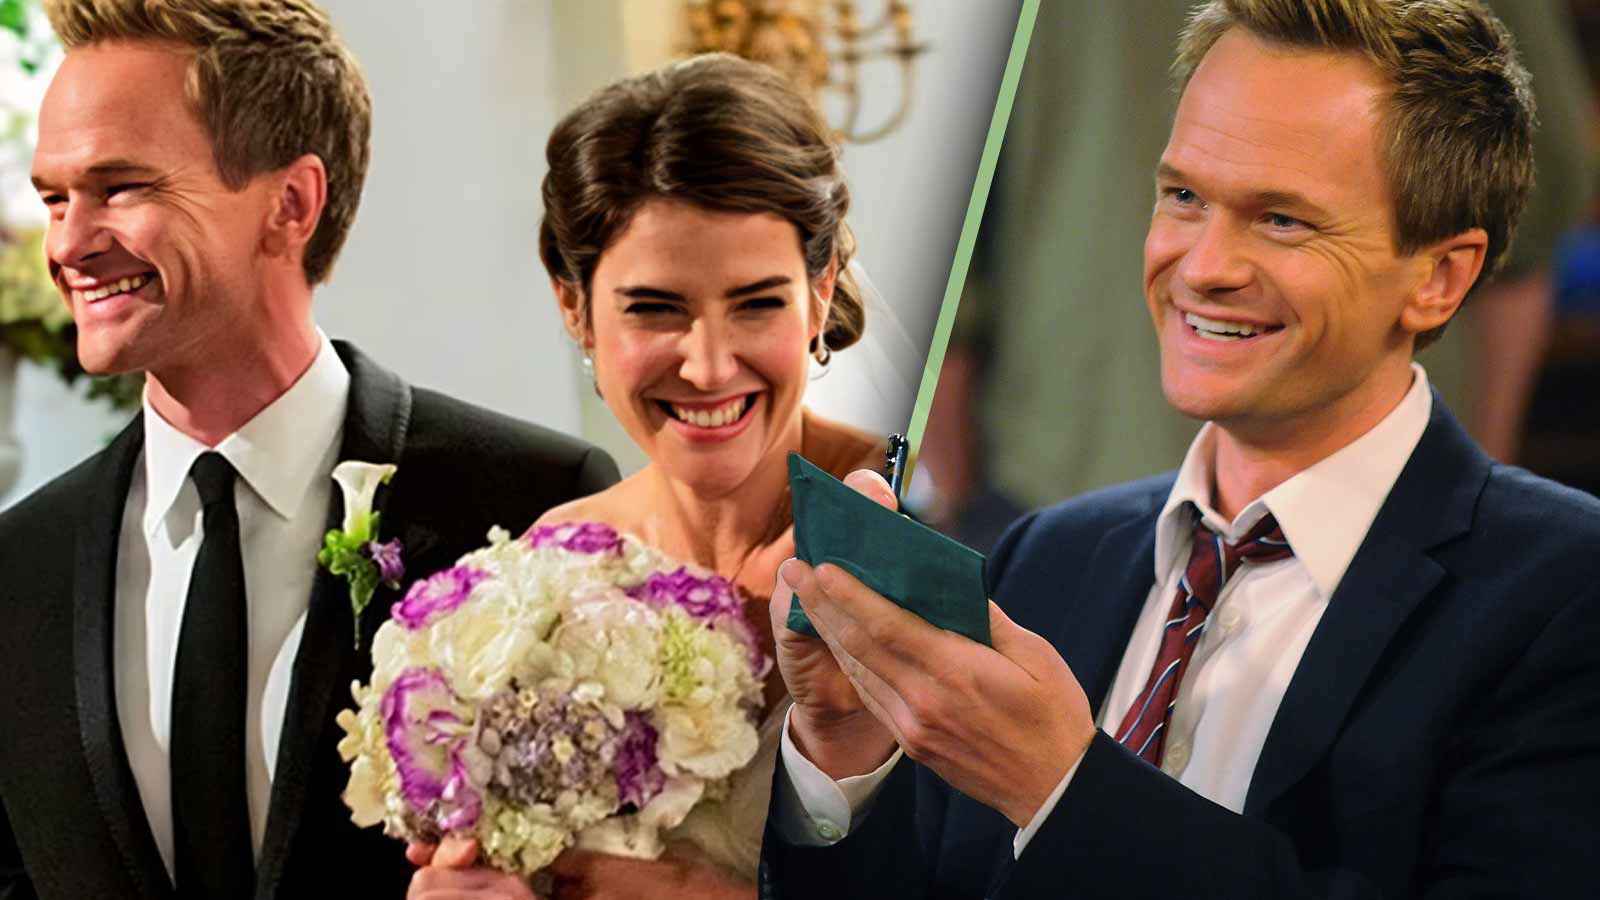 “I started flirting with her as much as I could on camera”: Neil Patrick Harris Was the Real Mastermind Behind Barney and Robin’s Love-story on ‘How I Met Your Mother’